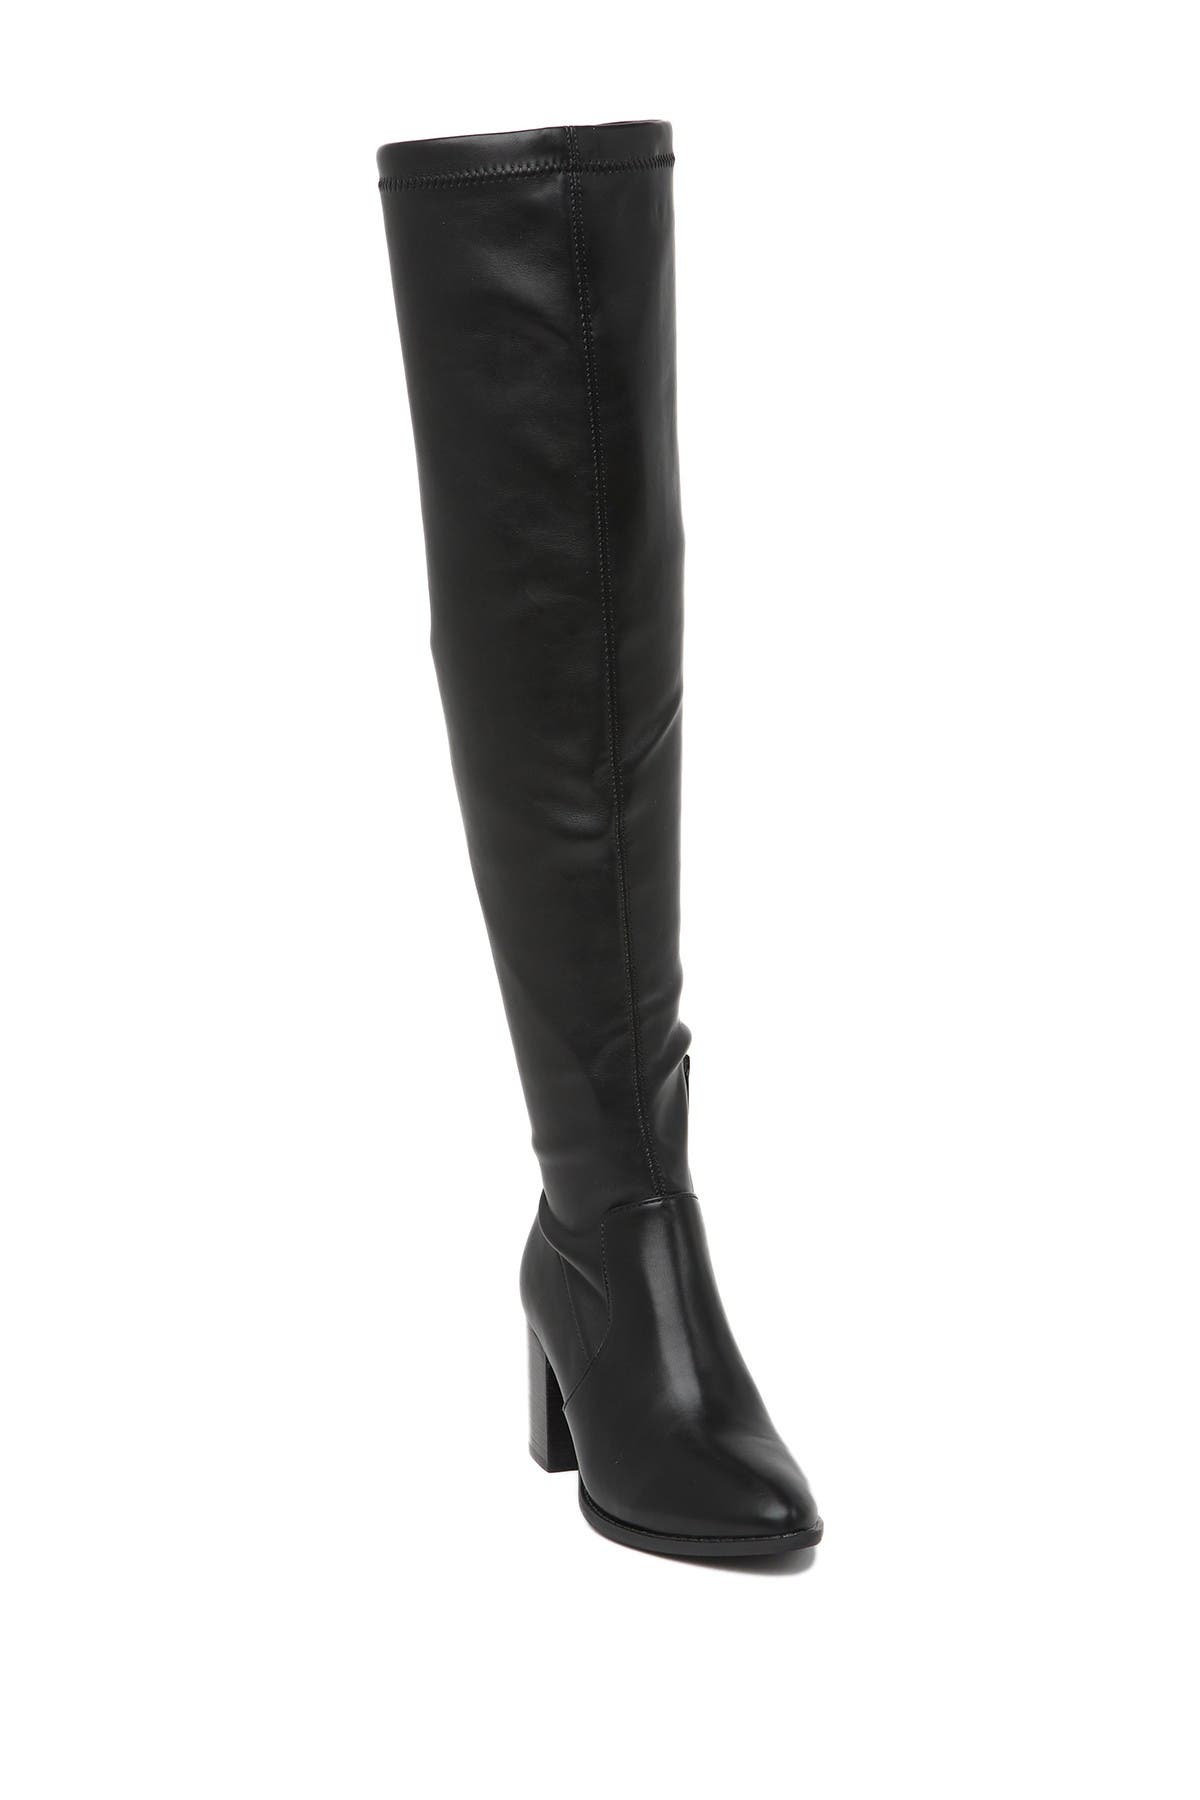 Dv Dolce Vita Trude Over-the-knee Stretch Boot In Charcoal3